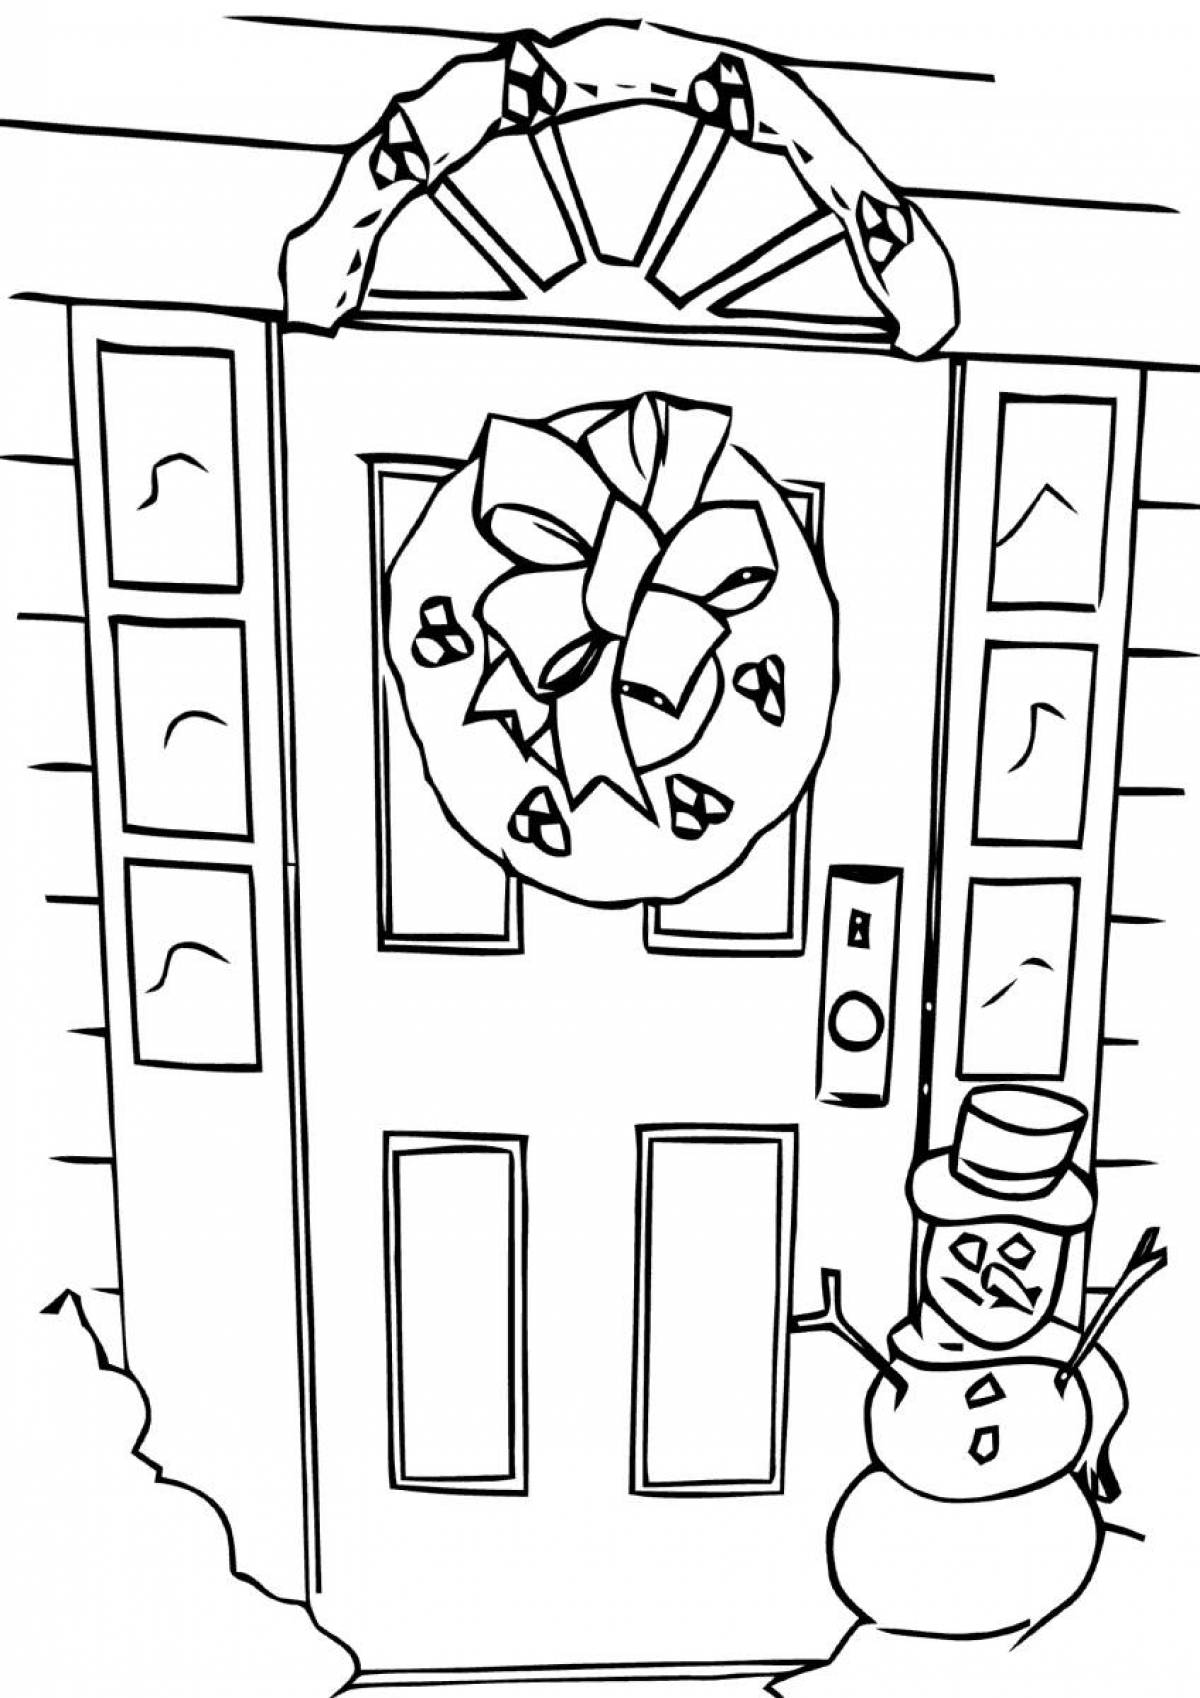 Magic door coloring pages